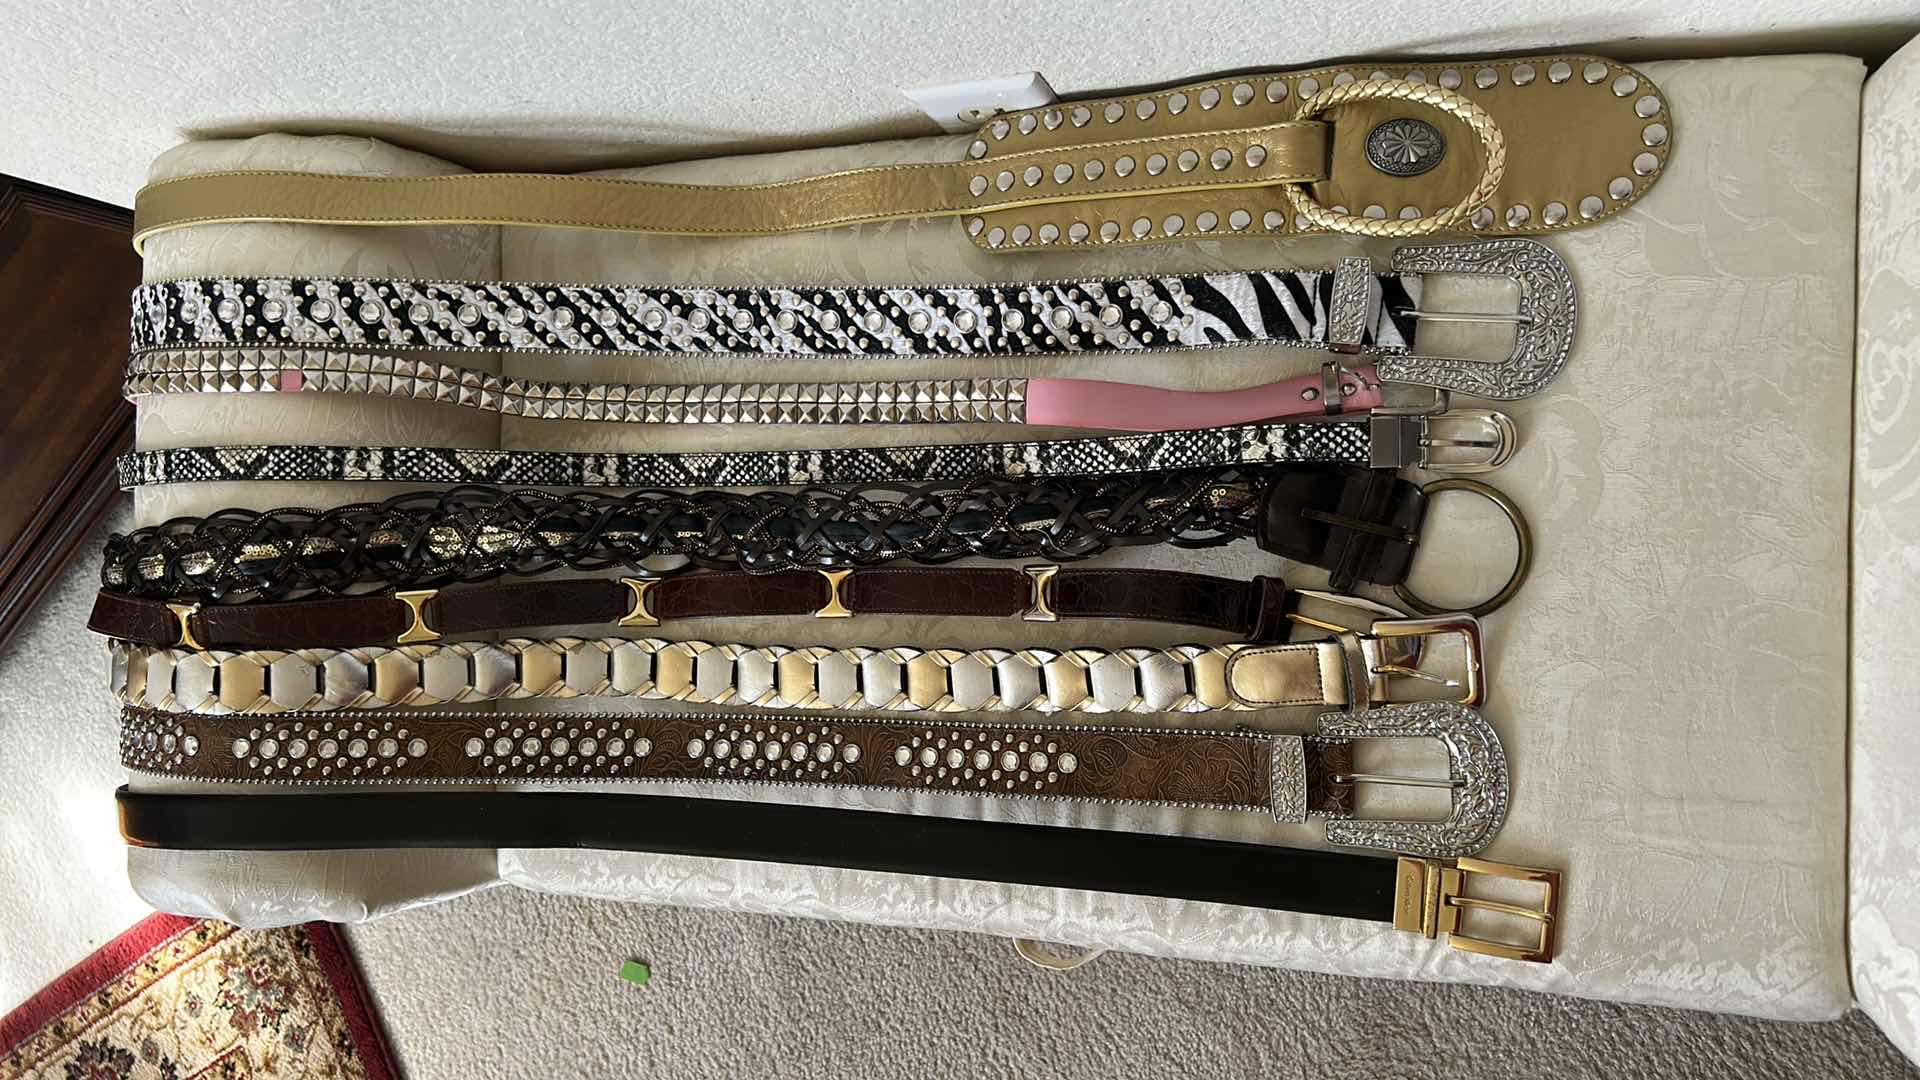 Photo 5 of 9 BELTS IN VARIOUS COLORS AND STYLES